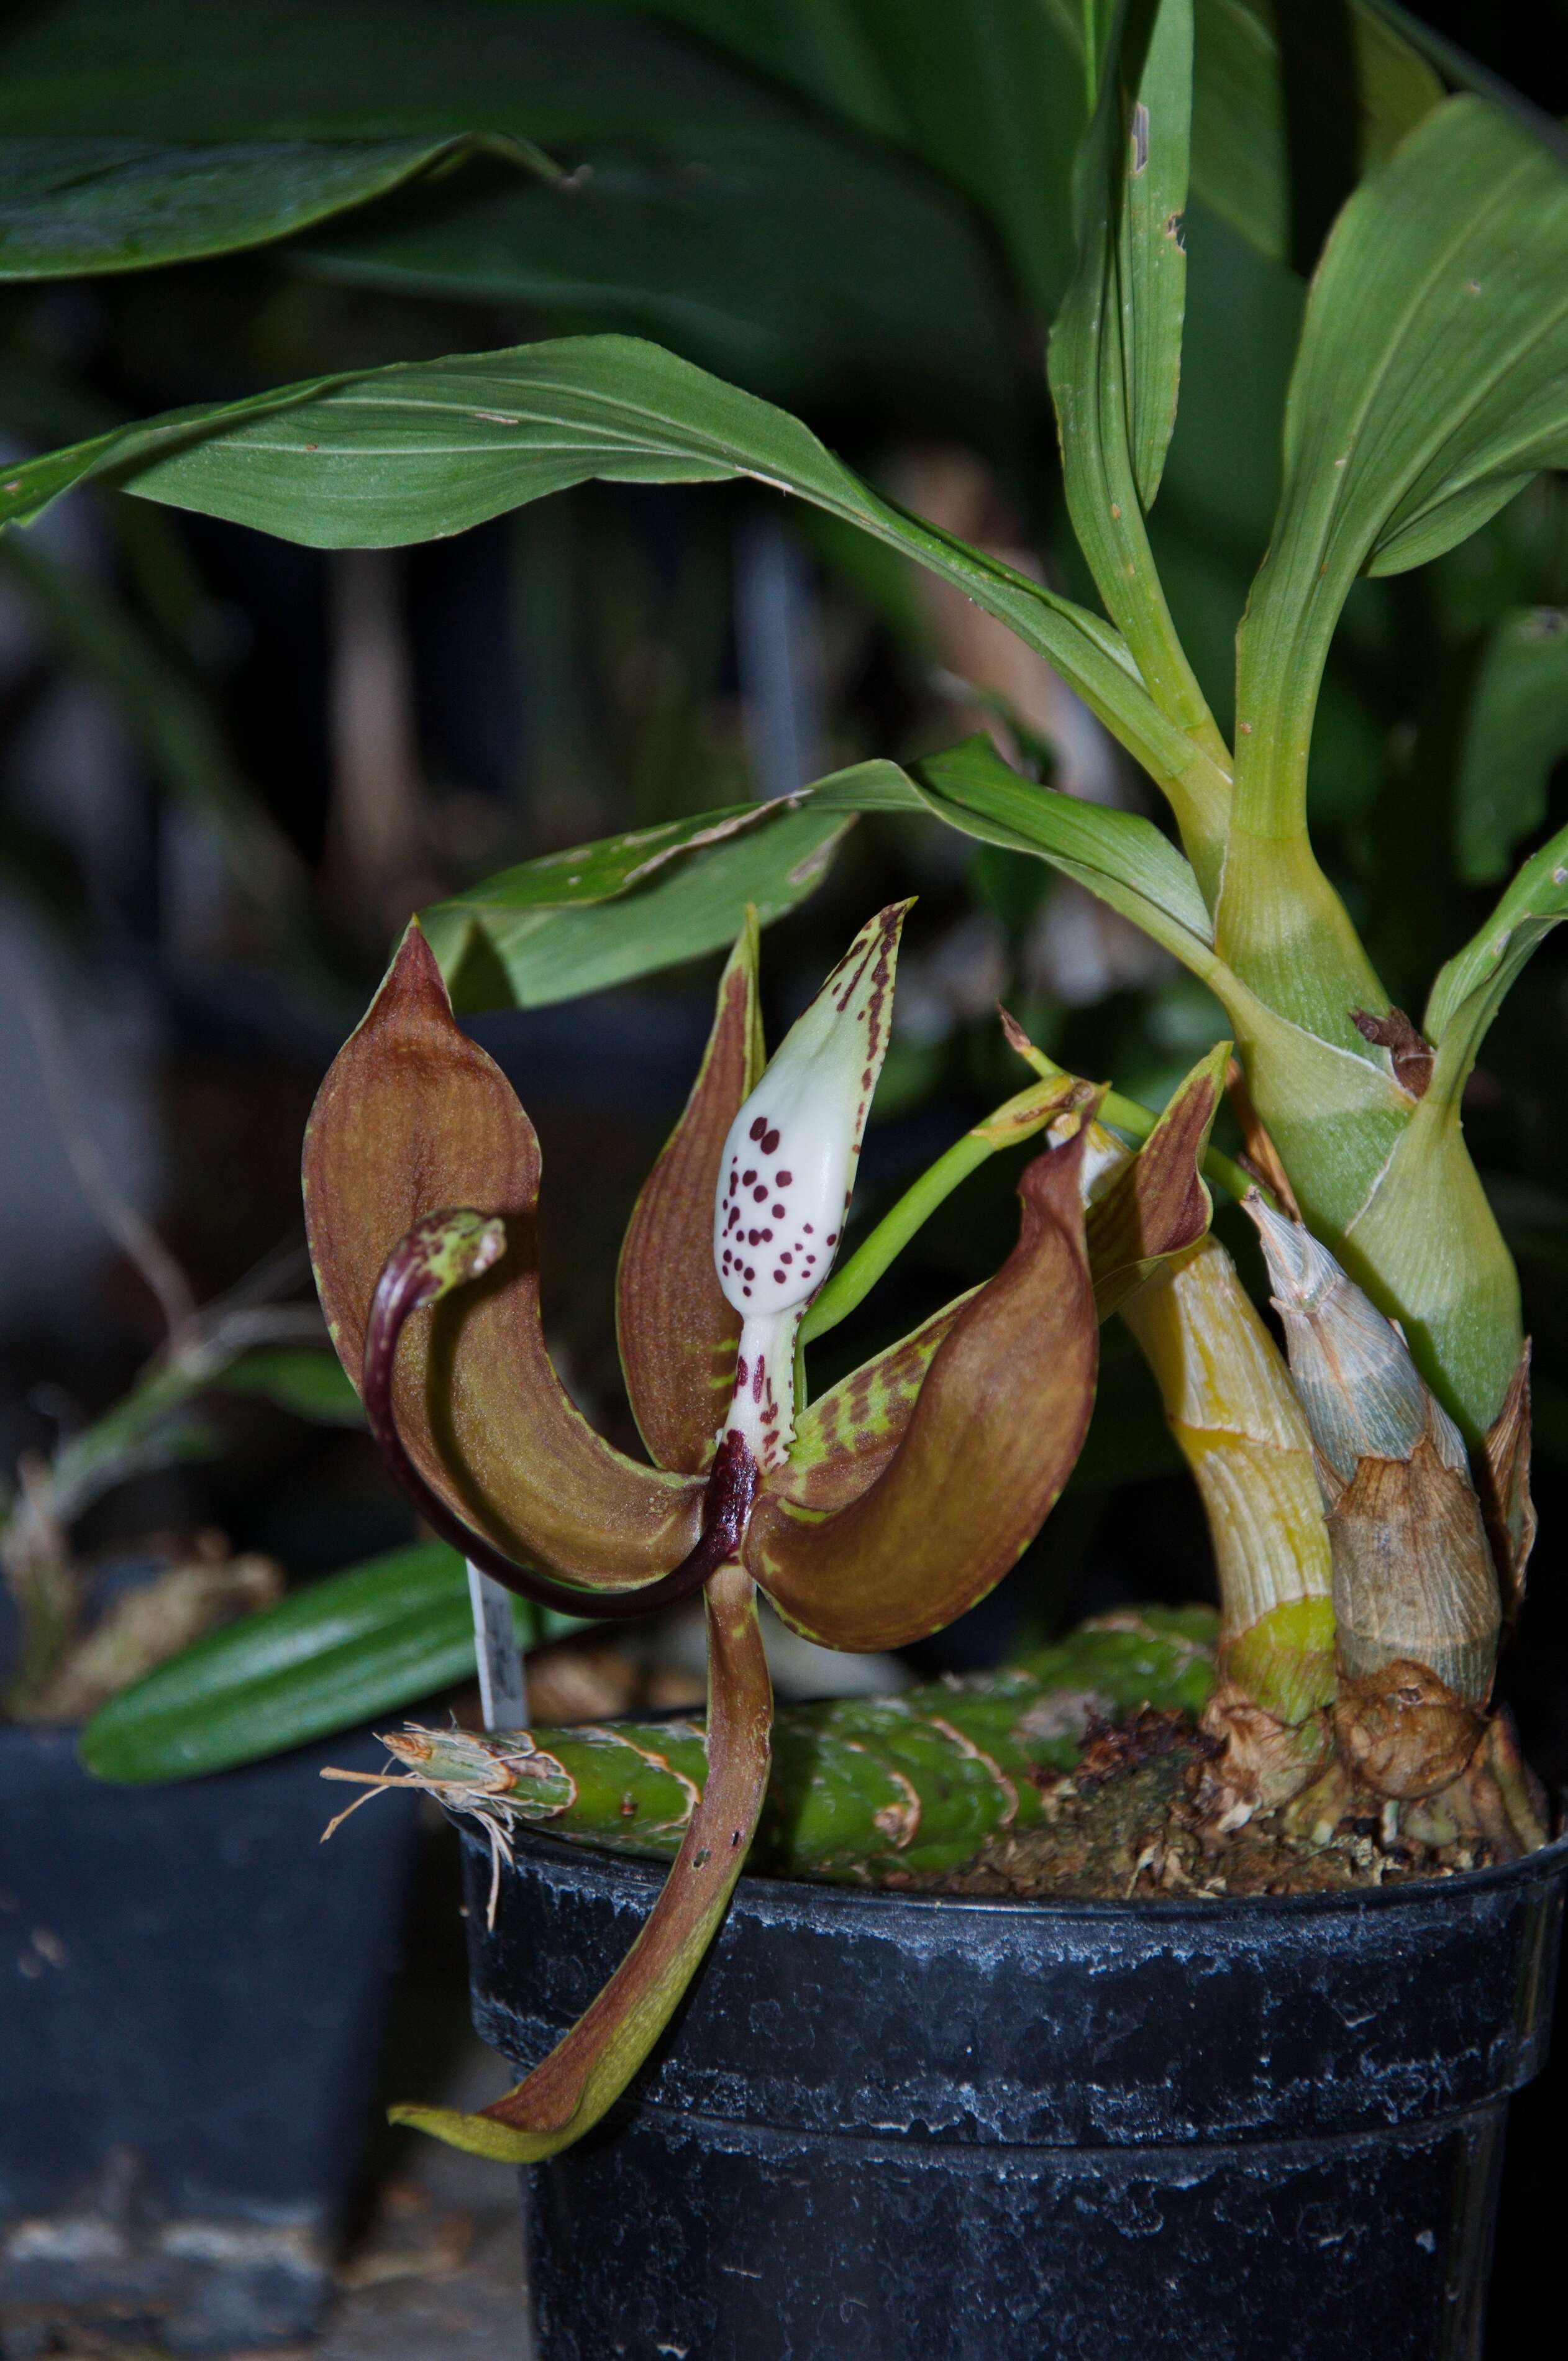 Image of Cycnoches